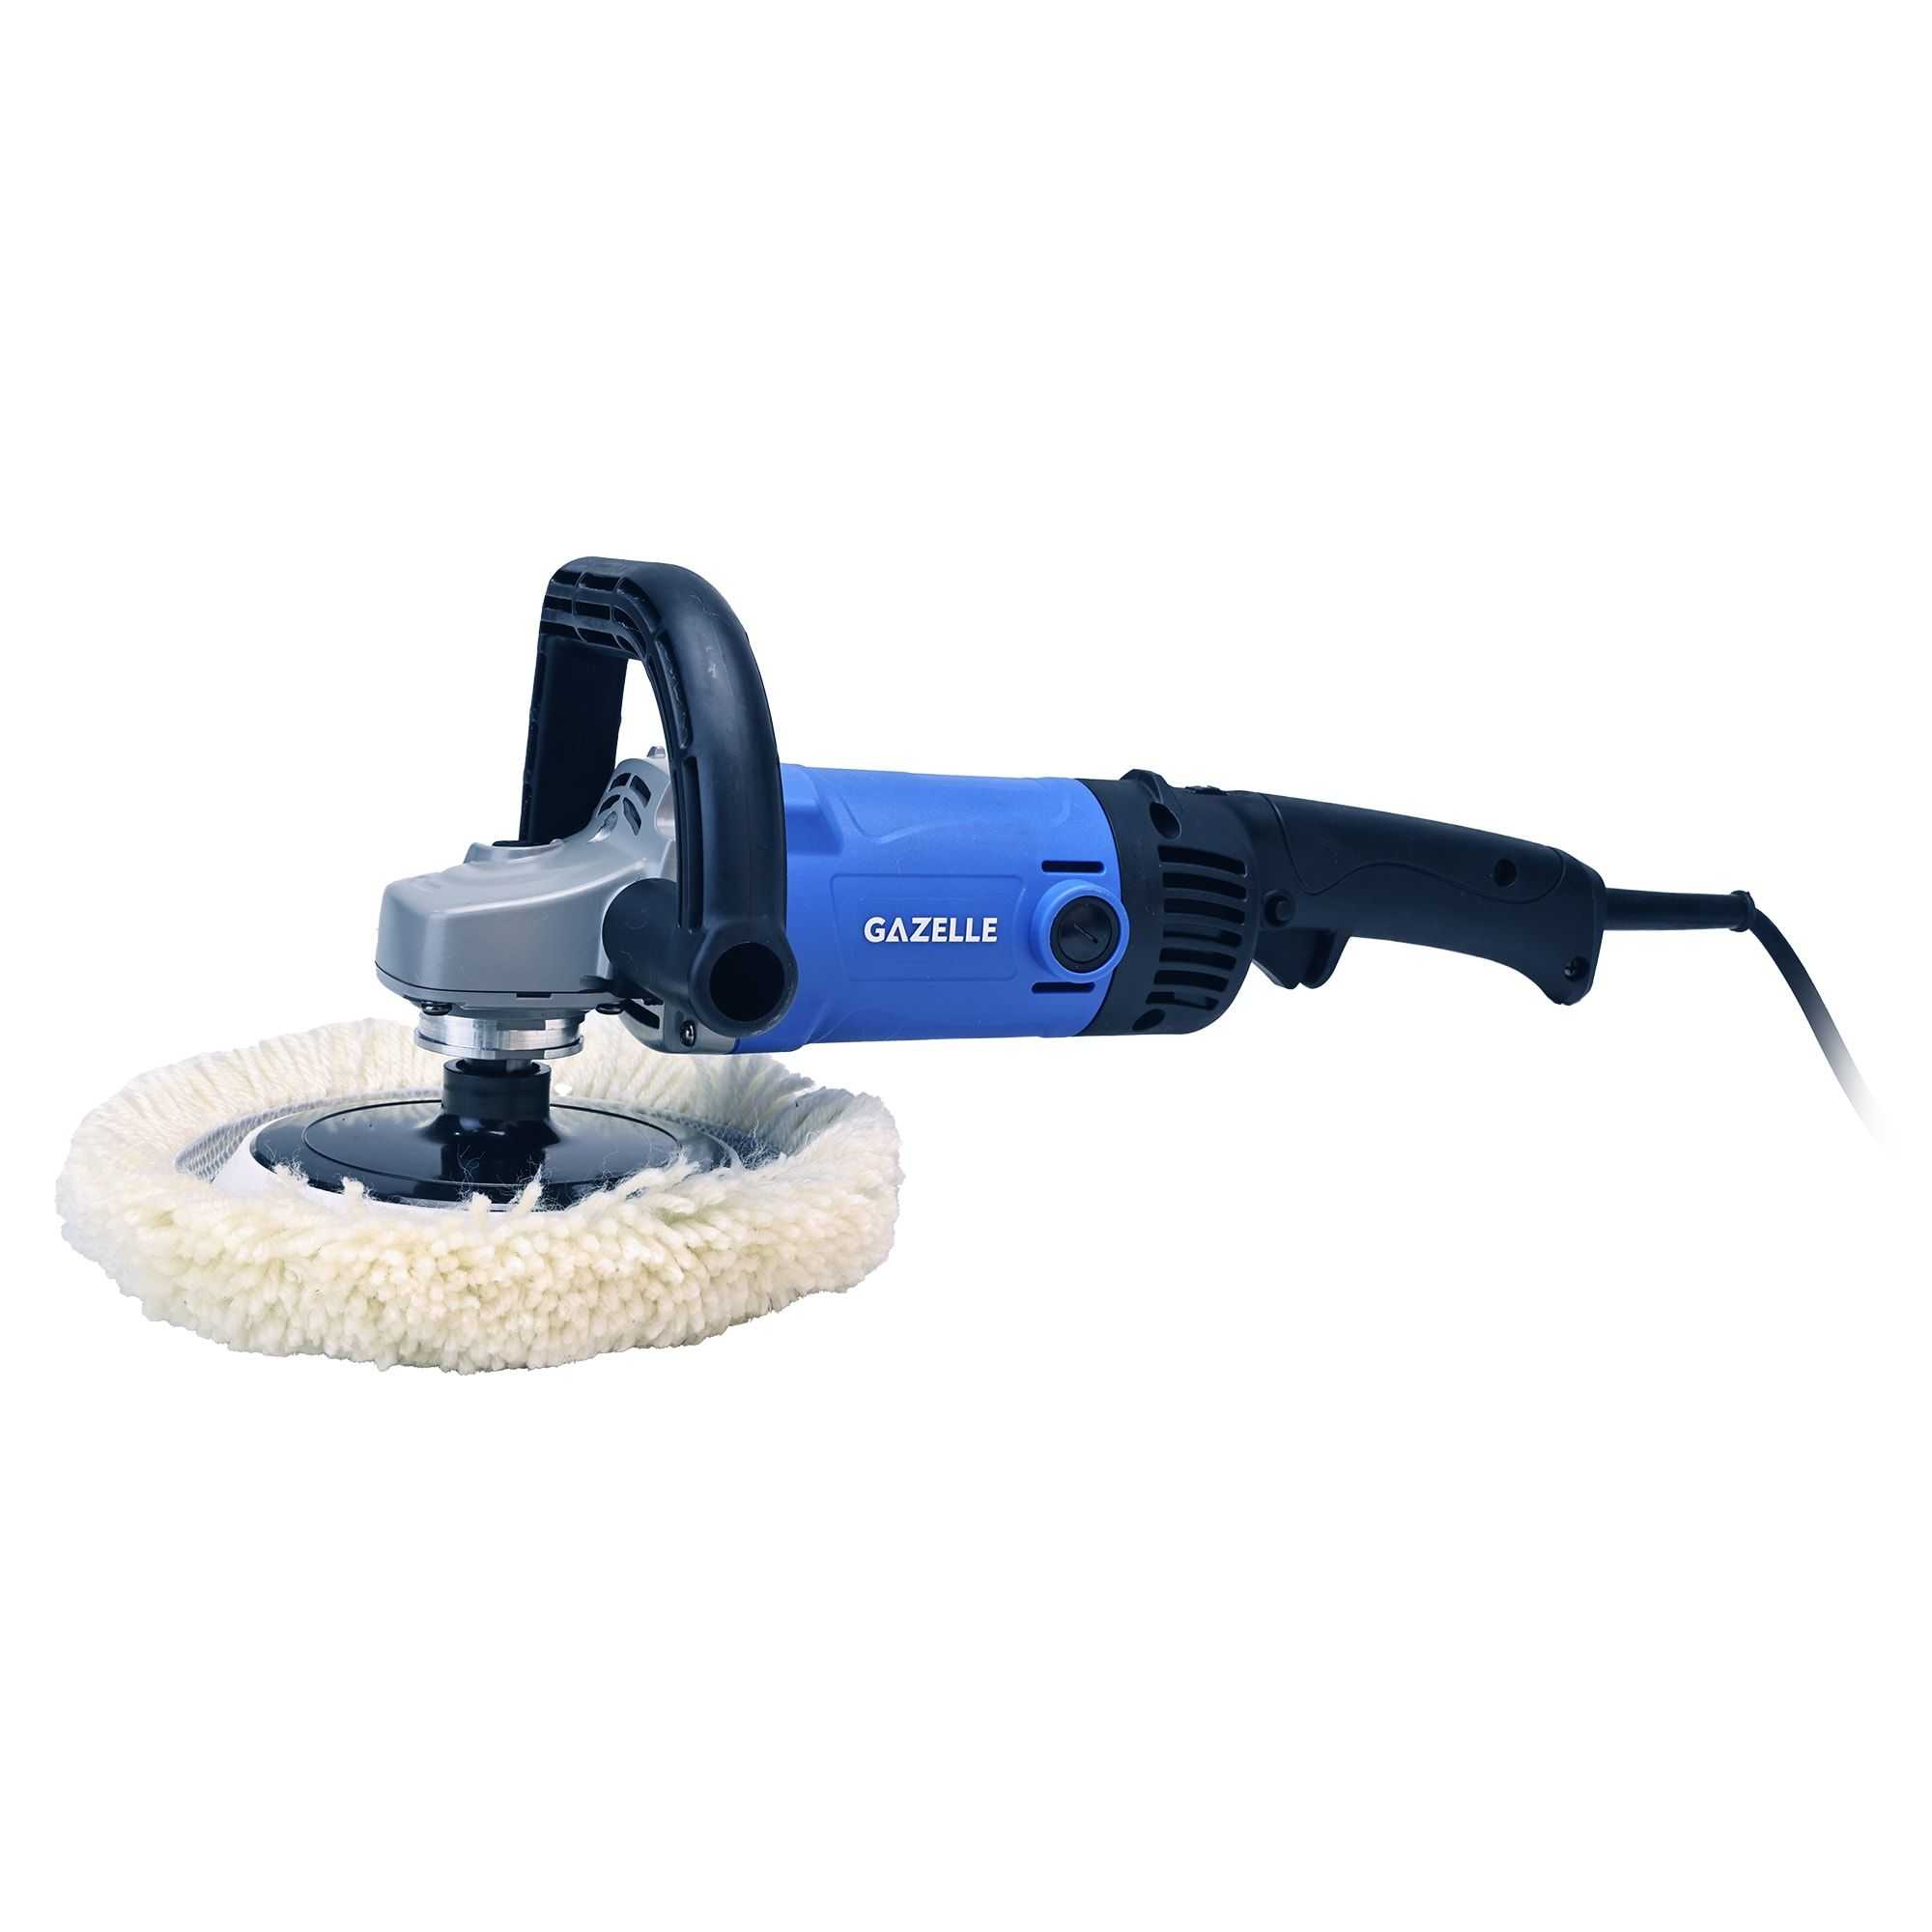 7" Variable Speed Polisher 1400W